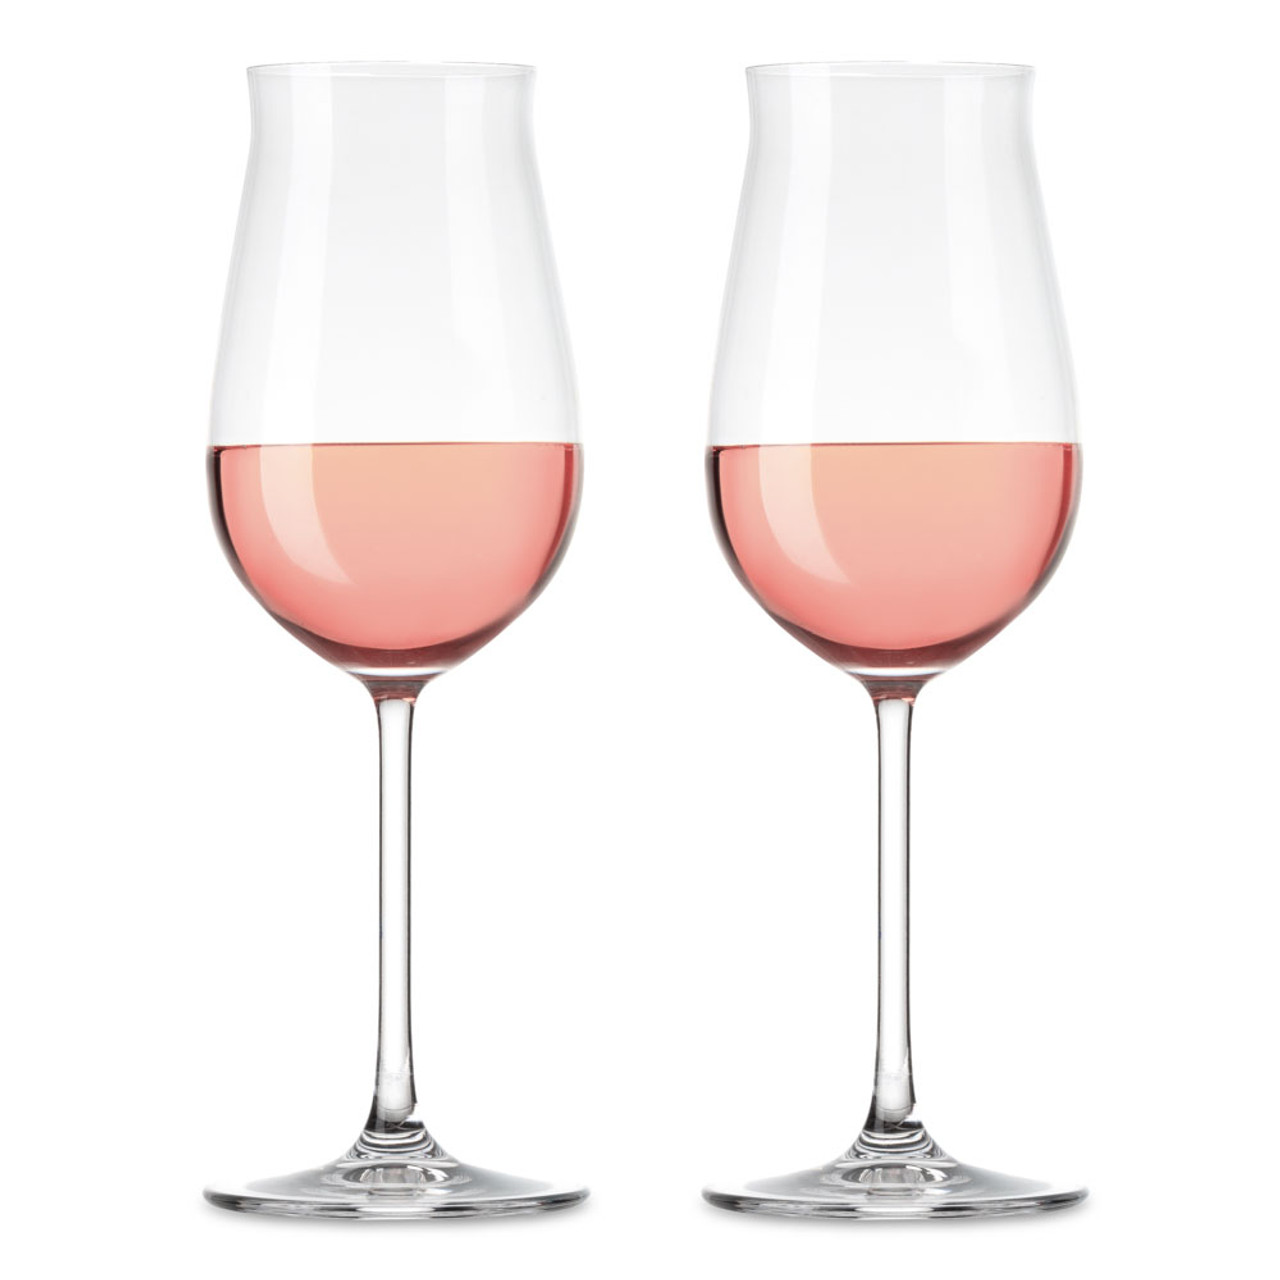 https://cdn11.bigcommerce.com/s-cznxq08r7/images/stencil/1280x1280/products/4981/13807/66113-1052489-Nude-Glass-Vintage-Rose-Crystal-Wine-Glasses-10-pt-75-oz-Set-of-2-01__32470.1623767401.jpg?c=1